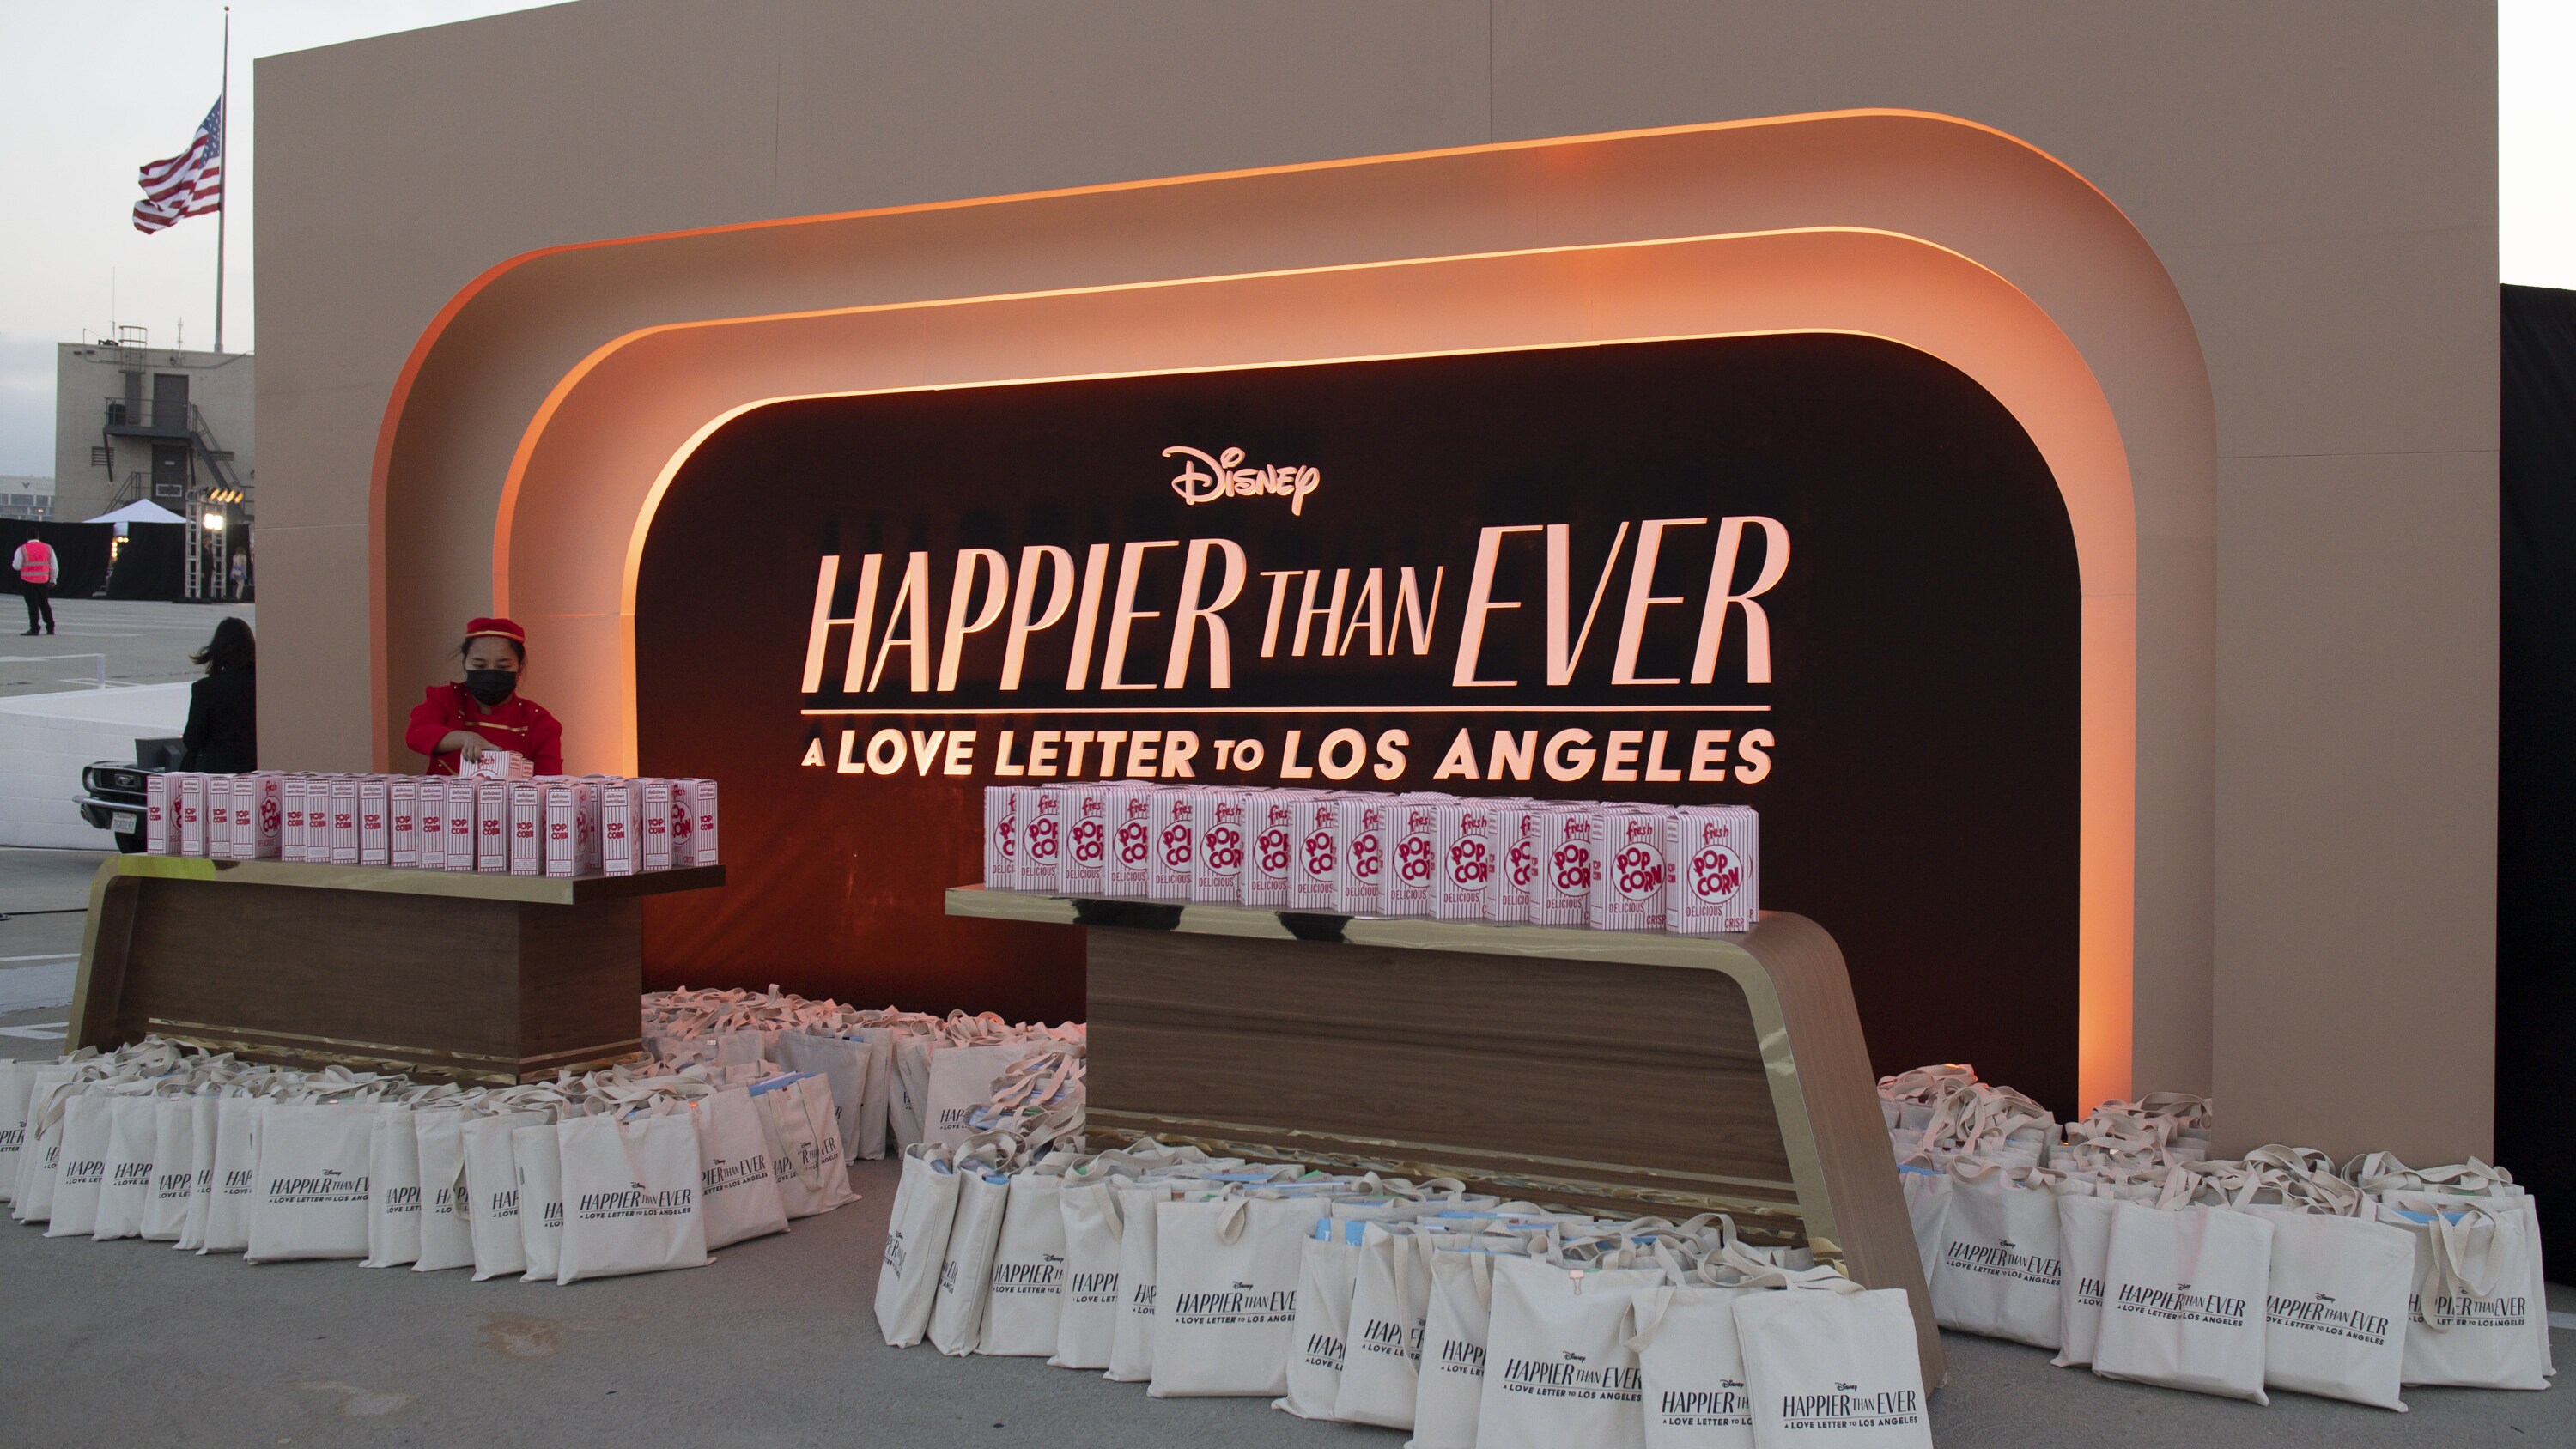 HAPPIER THAN EVER: A LOVE LETTER TO LOS ANGELES - Stars celebrated at the drive-in world premiere of the Disney+ original film, “Happier Than Ever: A Love Letter to Los Angeles,” a Billie Eilish concert experience, at The Grove in Los Angeles, Calif., Monday, August 30, 2021. (Disney/Kyusung Gong) HAPPIER THAN EVER: A LOVE LETTER TO LOS ANGELES